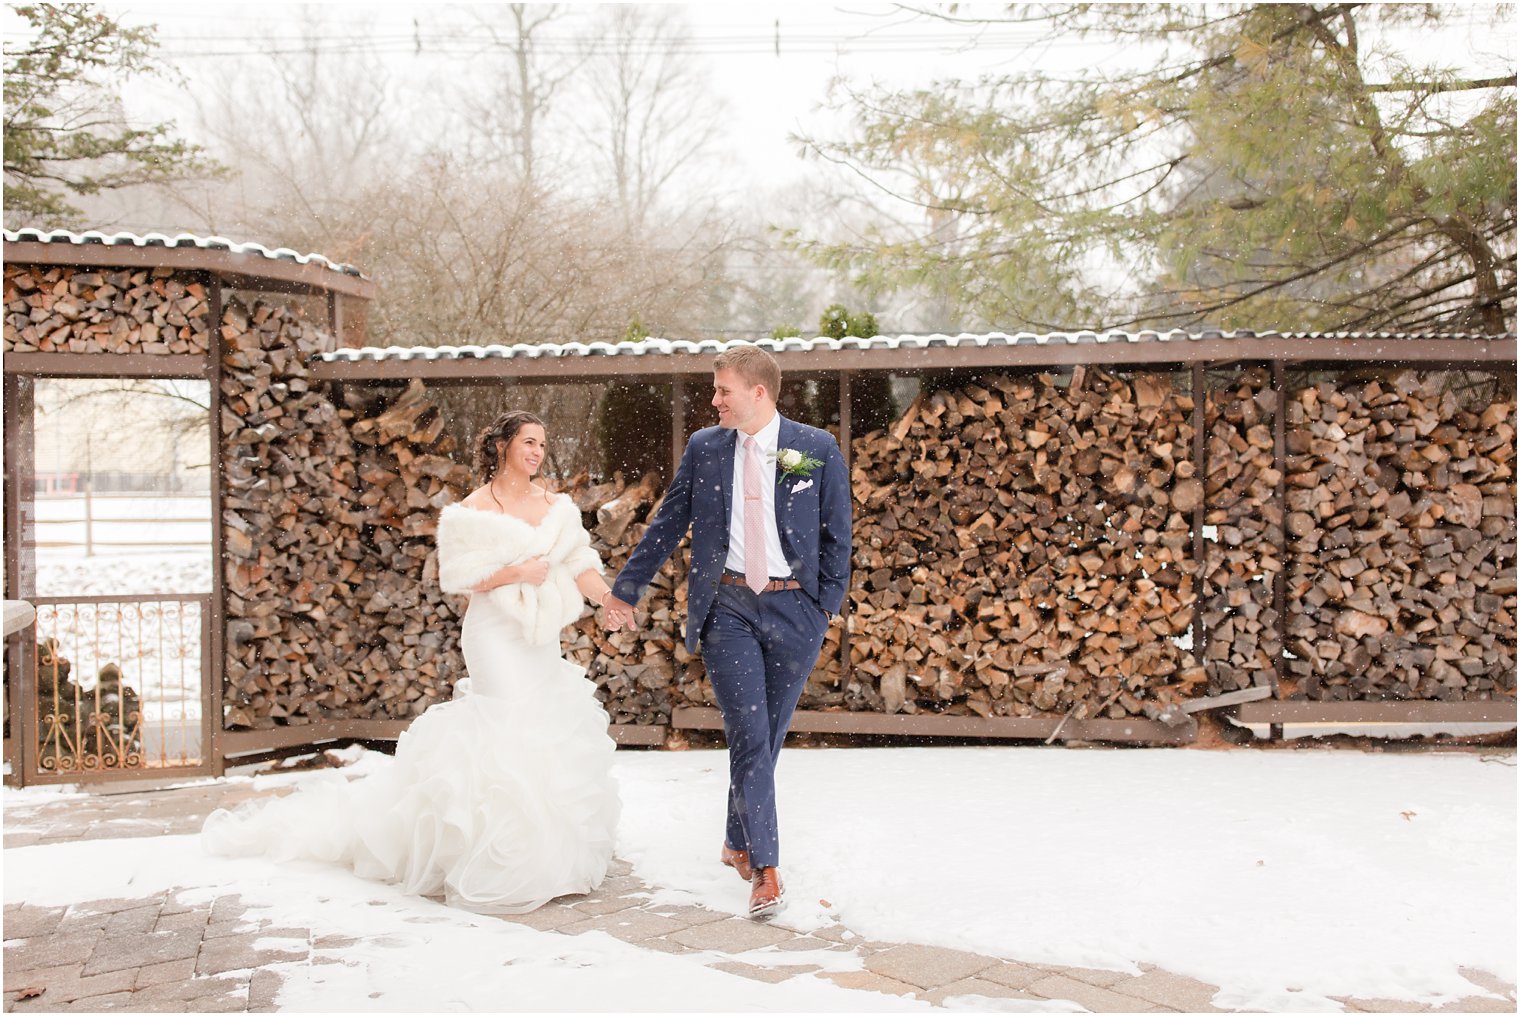 Snowy winter portraits of bride and groom at Stone House at Stirling Ridge in Warren, NJ